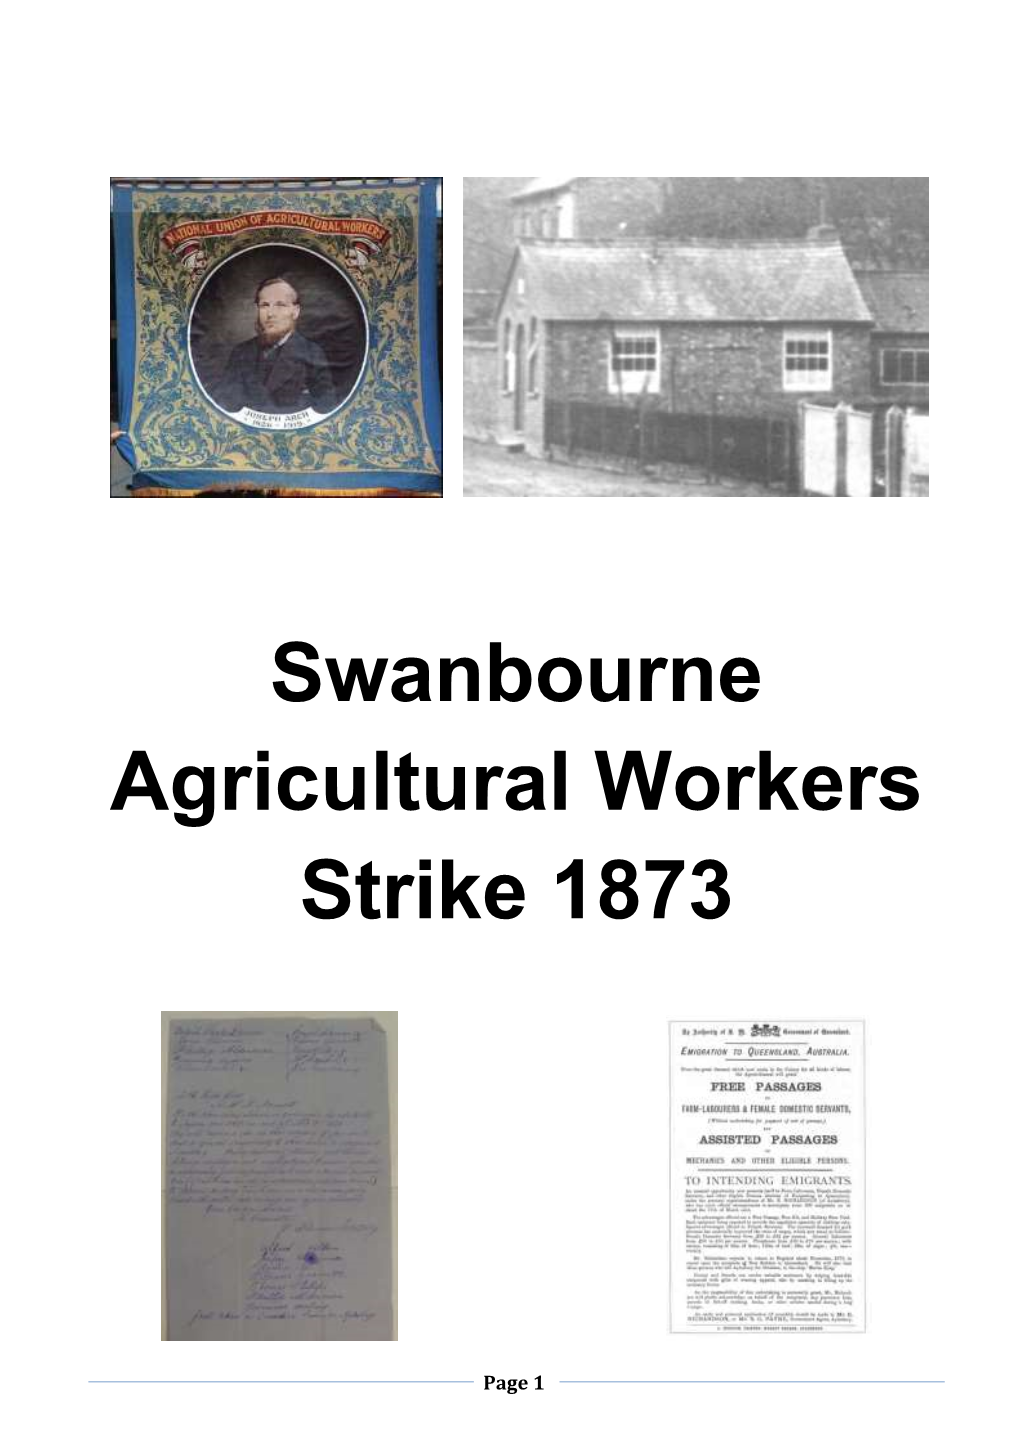 The Swanbourne Agricultural Workers Strike 1873